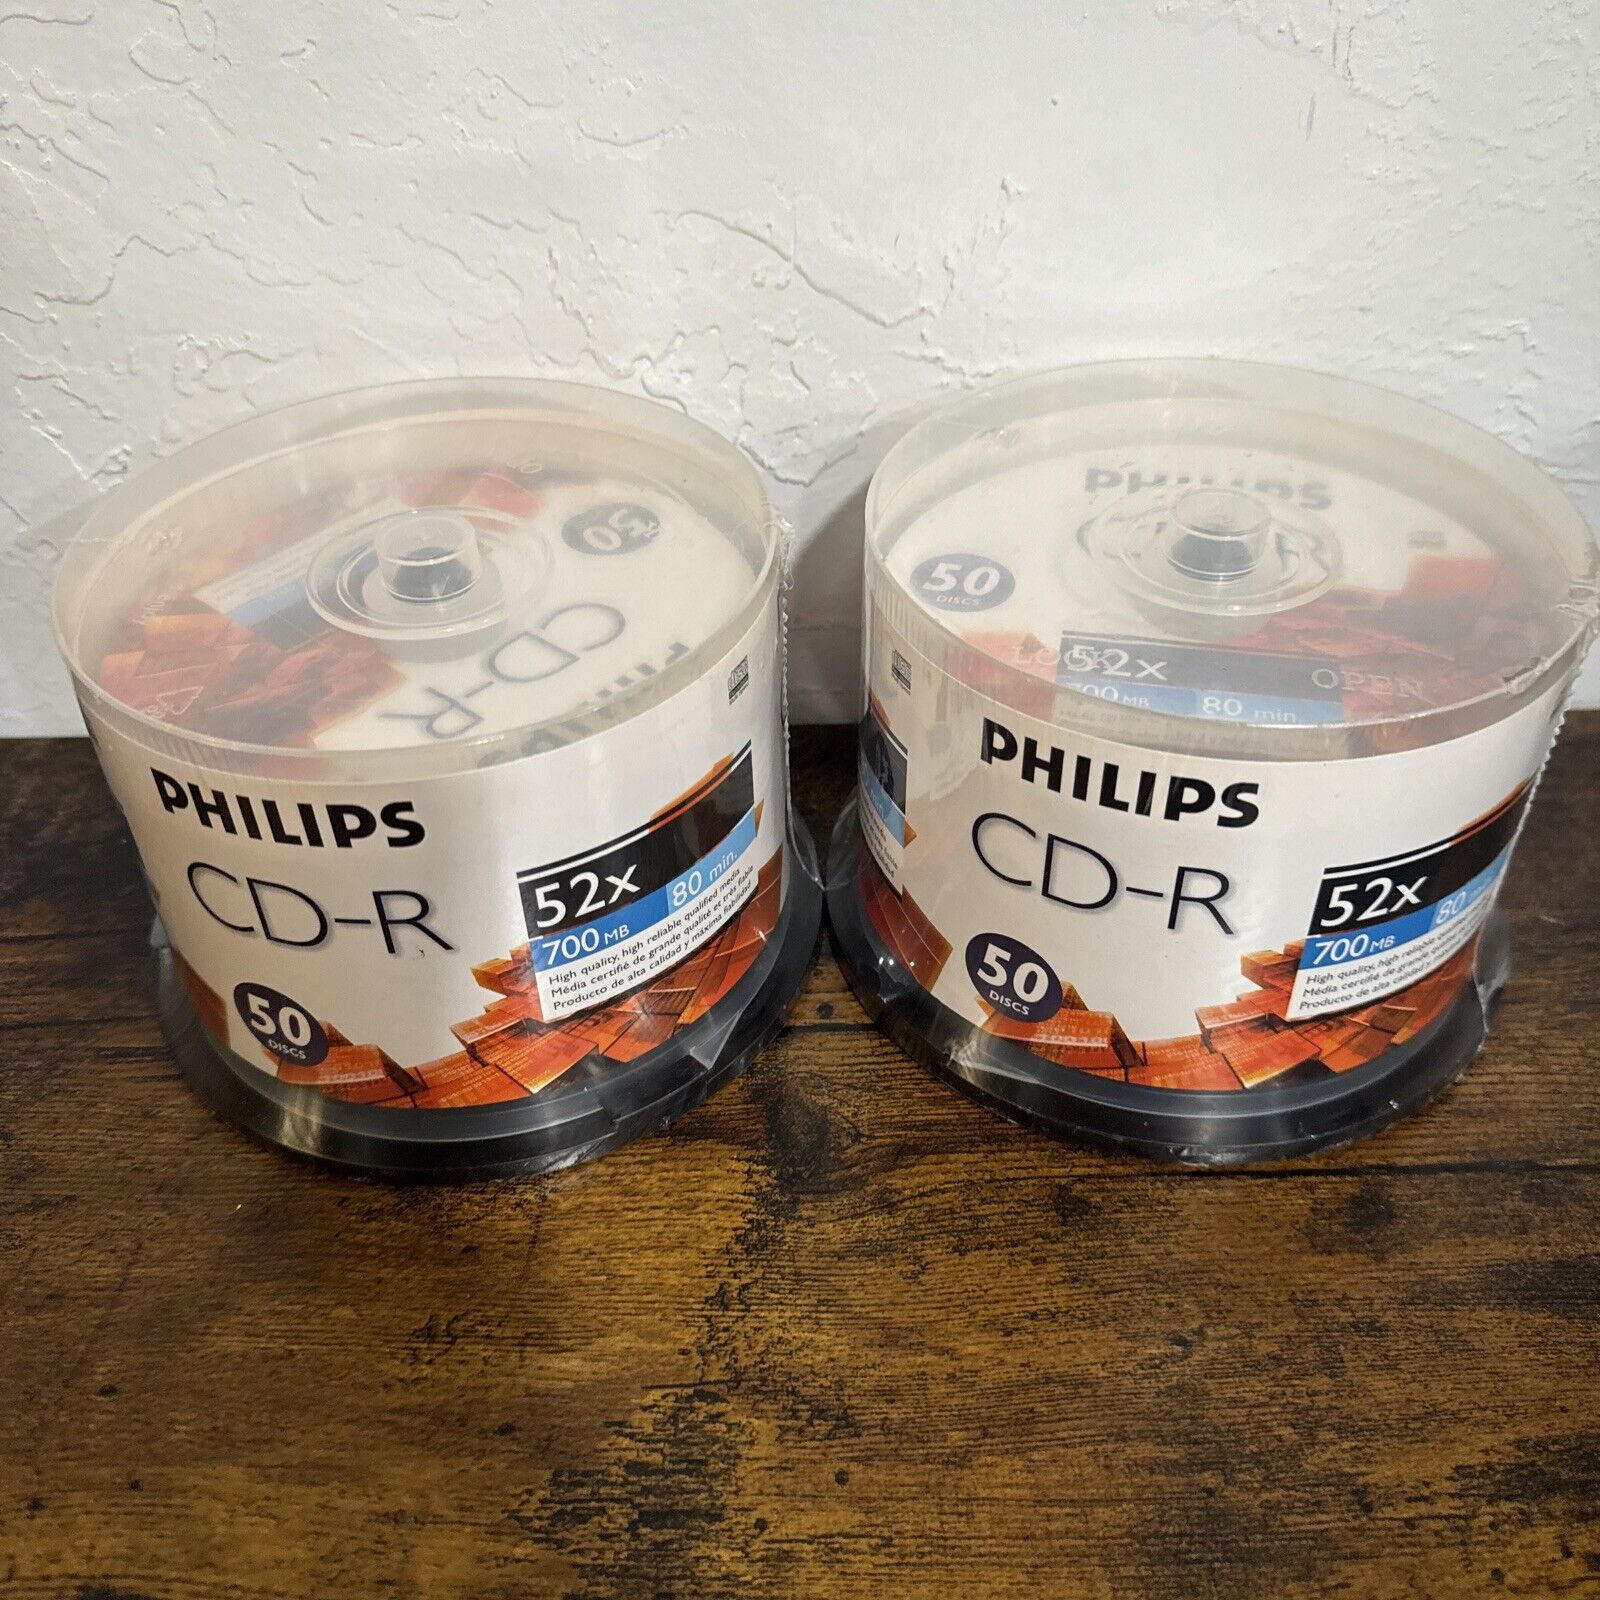 New 2 Philips Blank Discs CD-R 700MB, 52x, 80min, 50 Discs each Container